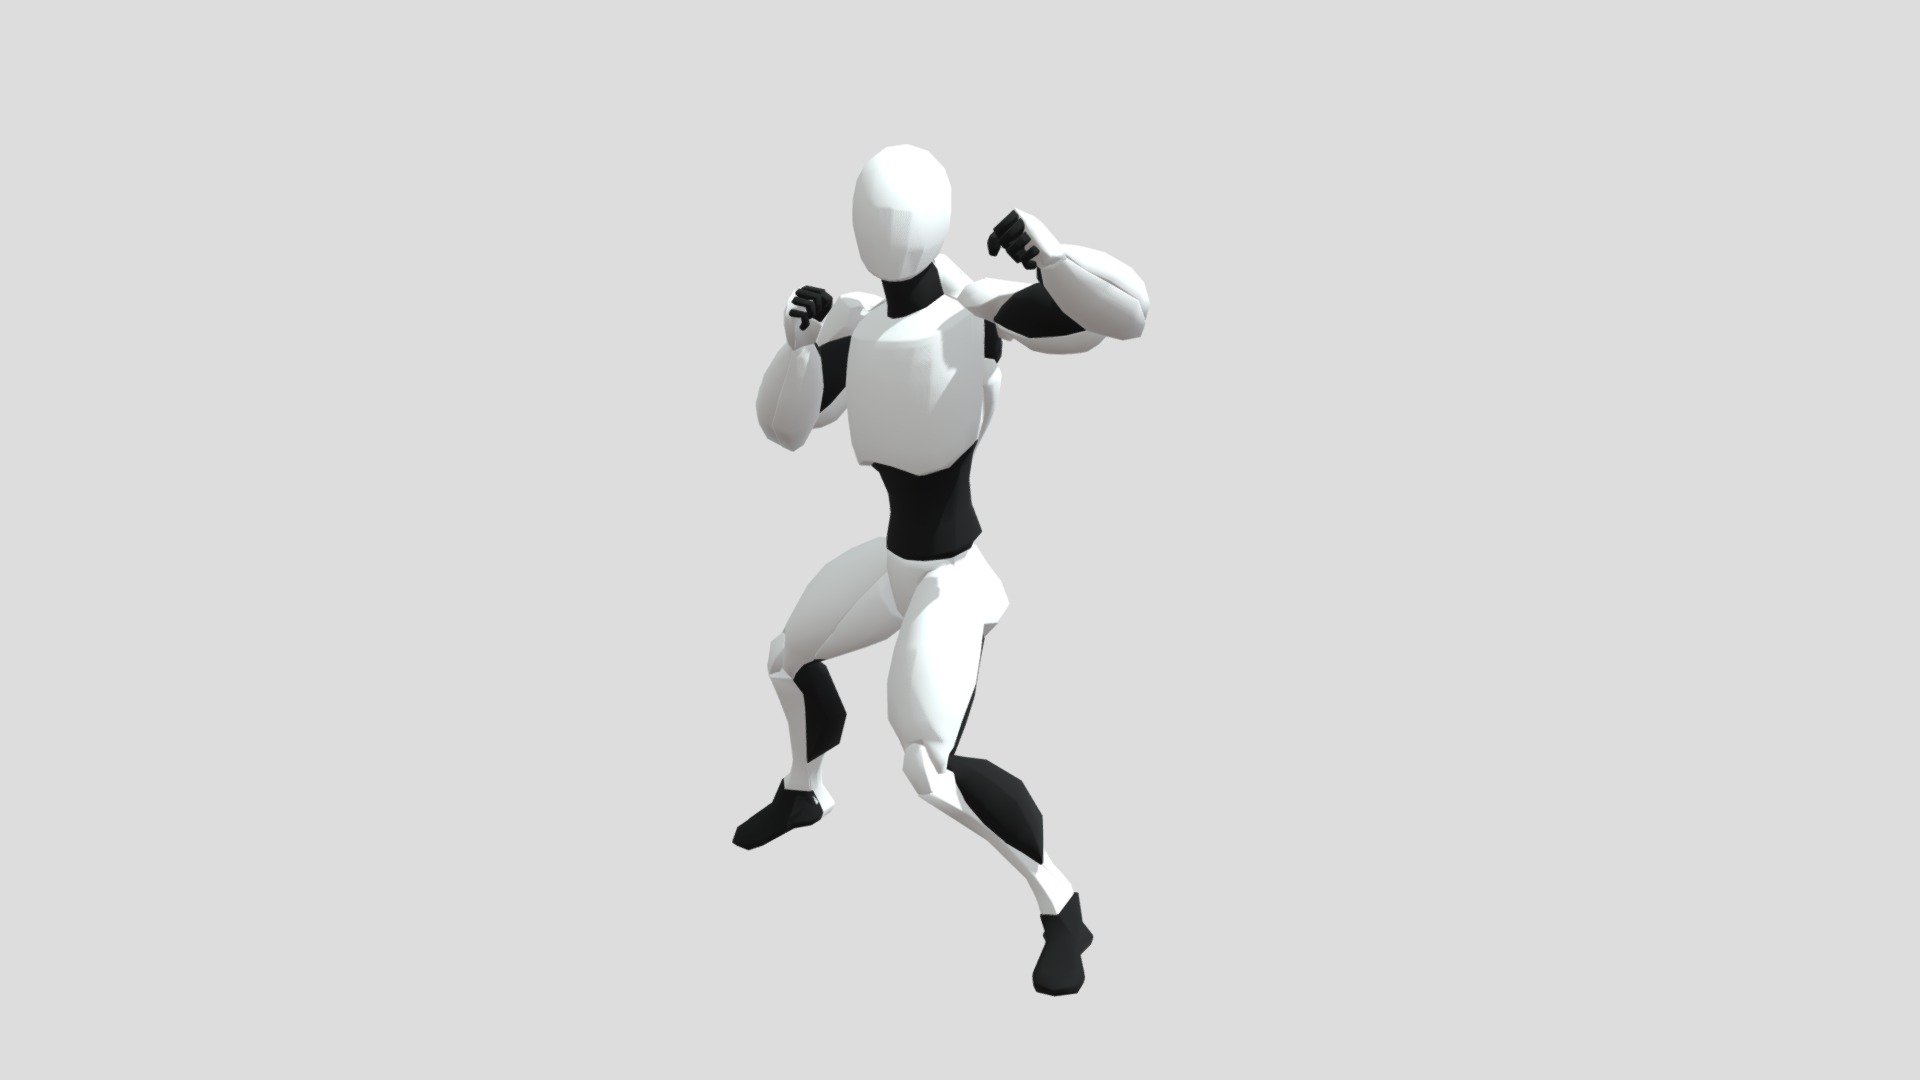 Full Preview
https://youtu.be/yoz810E9cMQ?feature=shared

This asset is composed of various 67 high-quality motion capture animations needed for game development.
Animation Clips consist of all looping animation Mecanim compatible.
Also, all motion is humanoid based.
We have a professional motion capture team. Our database has thousands of animations.
We are pleased to share with you our motion capture work. Please look forward to more work from us. Please stay tuned!

Technical details

Rigged to Epic skeleton: Yes

Number of Animations: 67

Animation types: Root-Motion

Number of Characters: 1

Vertex Counts of Characters: 106462

Number of Materials and Material Instances: 6

Supported Development Platforms:

Windows: Yes

Mac: Yes - AA_ Boxing - Buy Royalty Free 3D model by animo_mocap 3d model